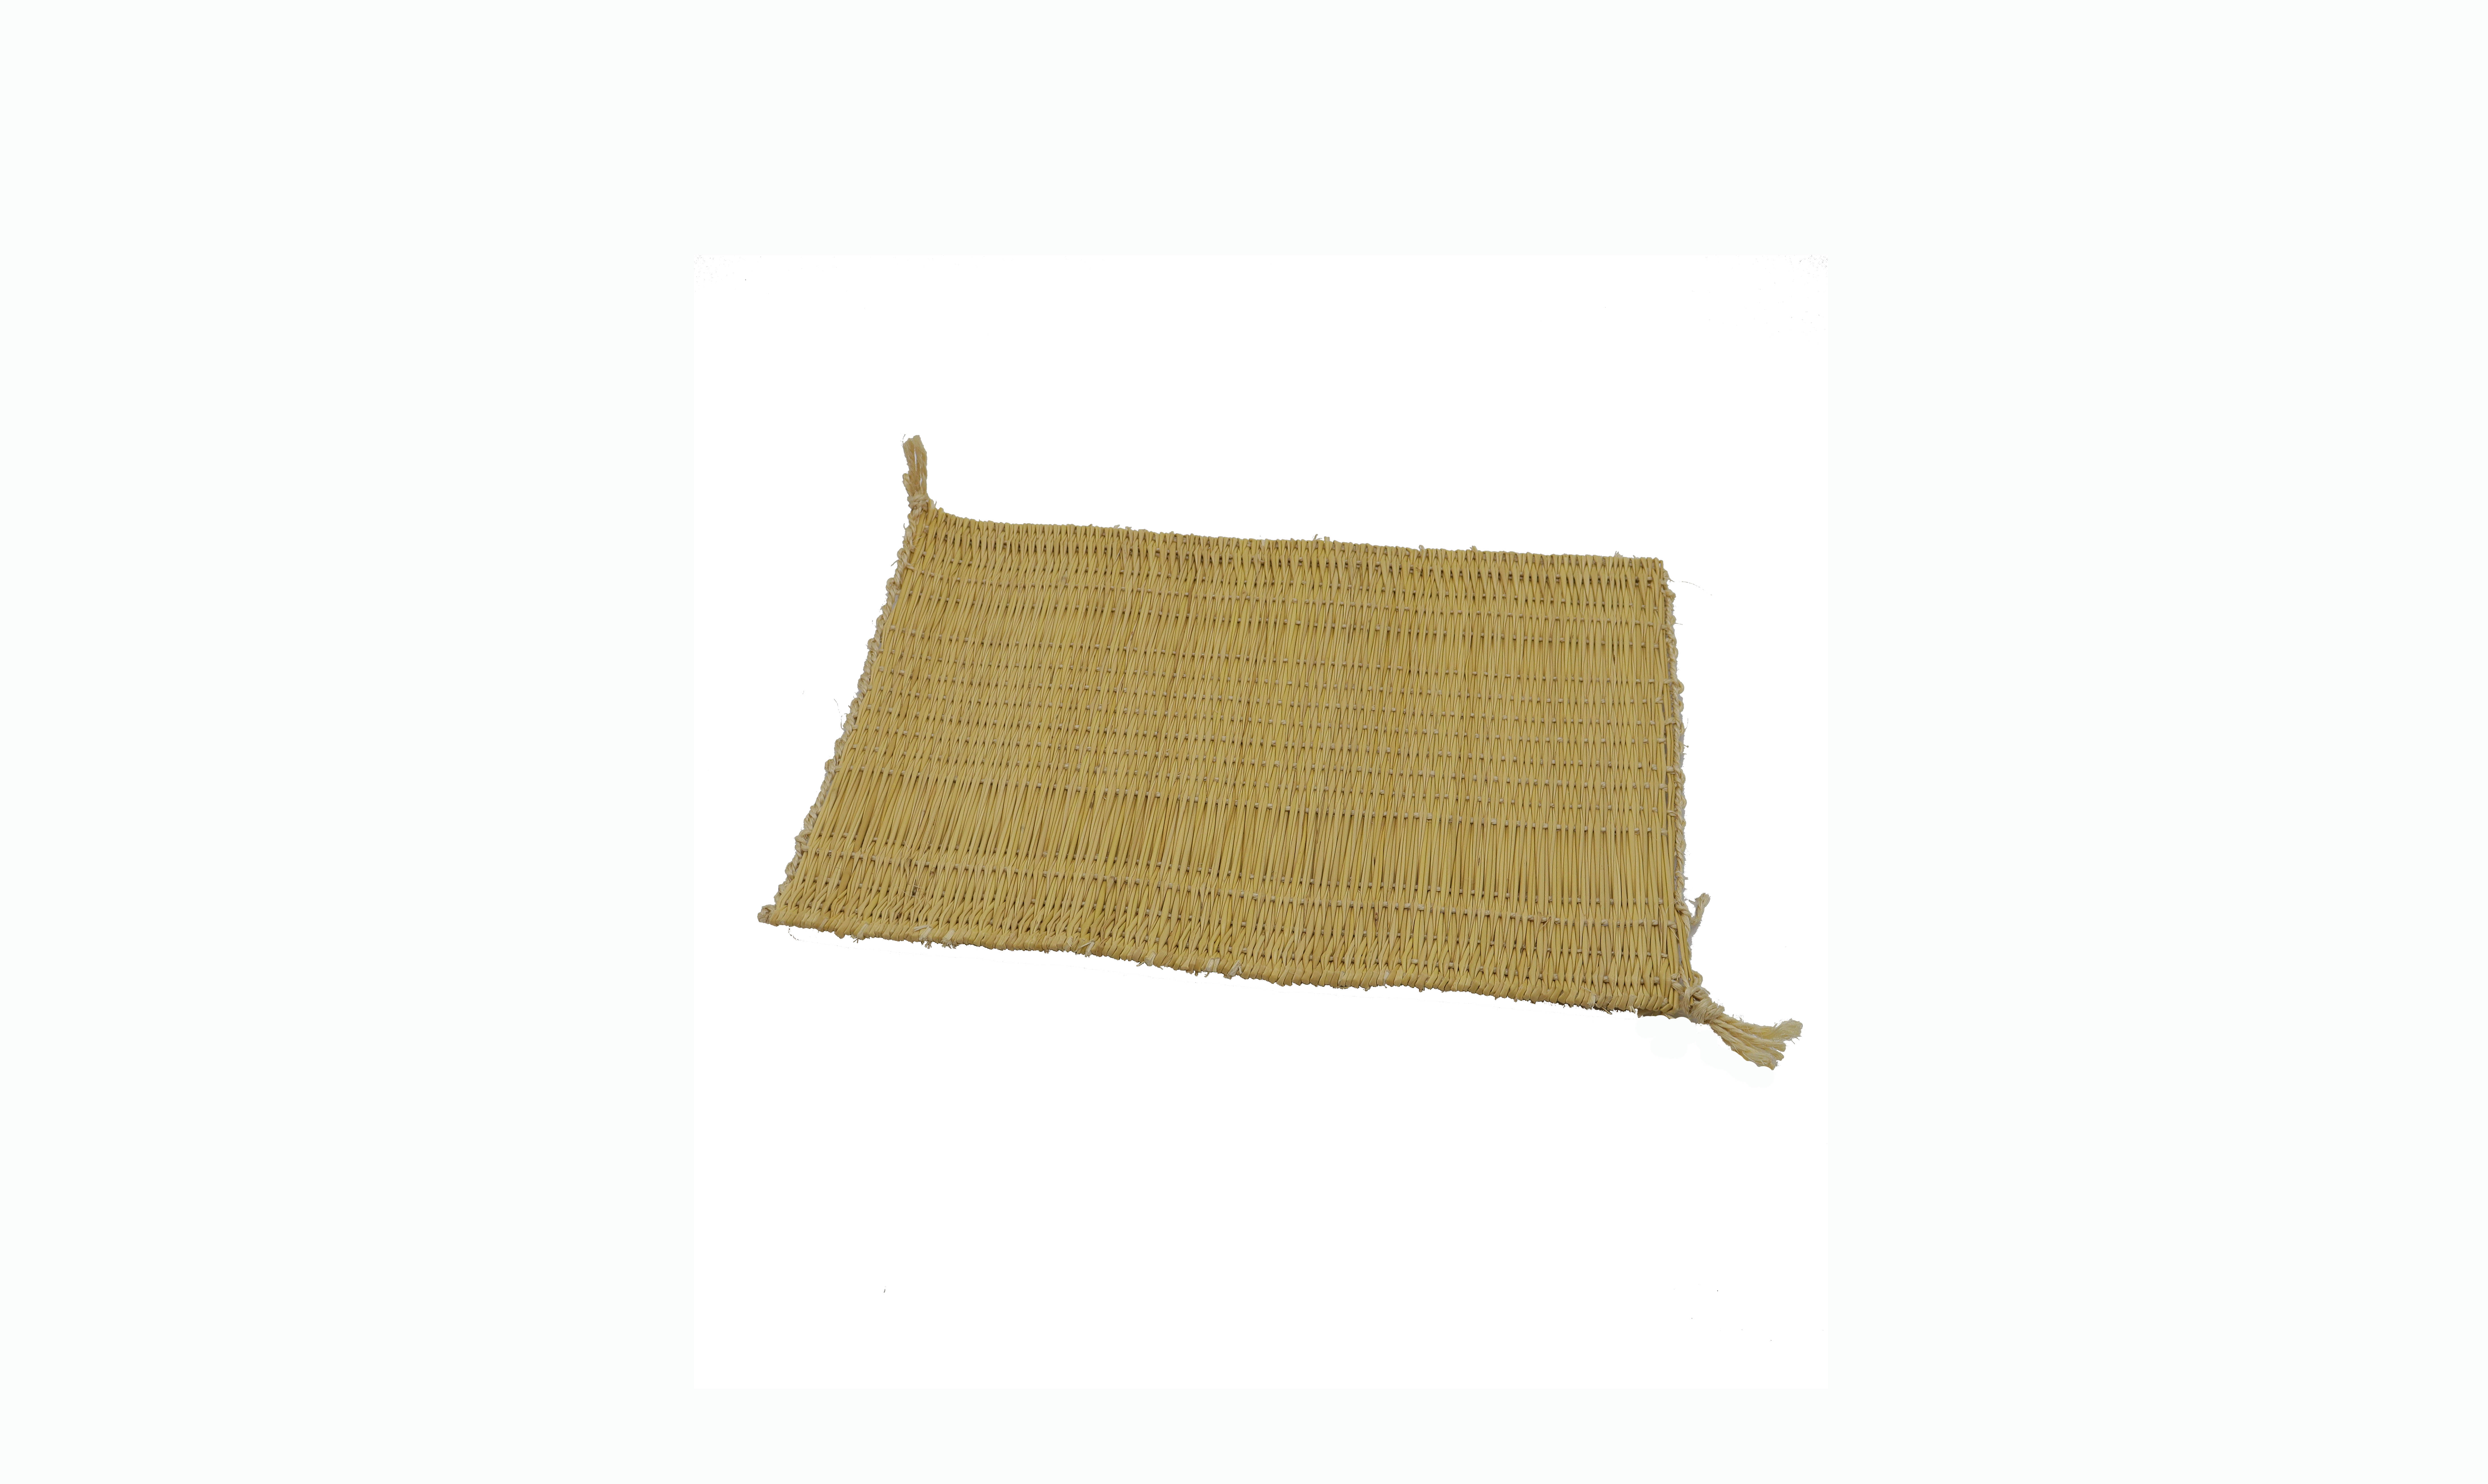 Product.Rectangular placemat in hand-braided rush - dining table decoration  - Handmade - natural - 50x30cm